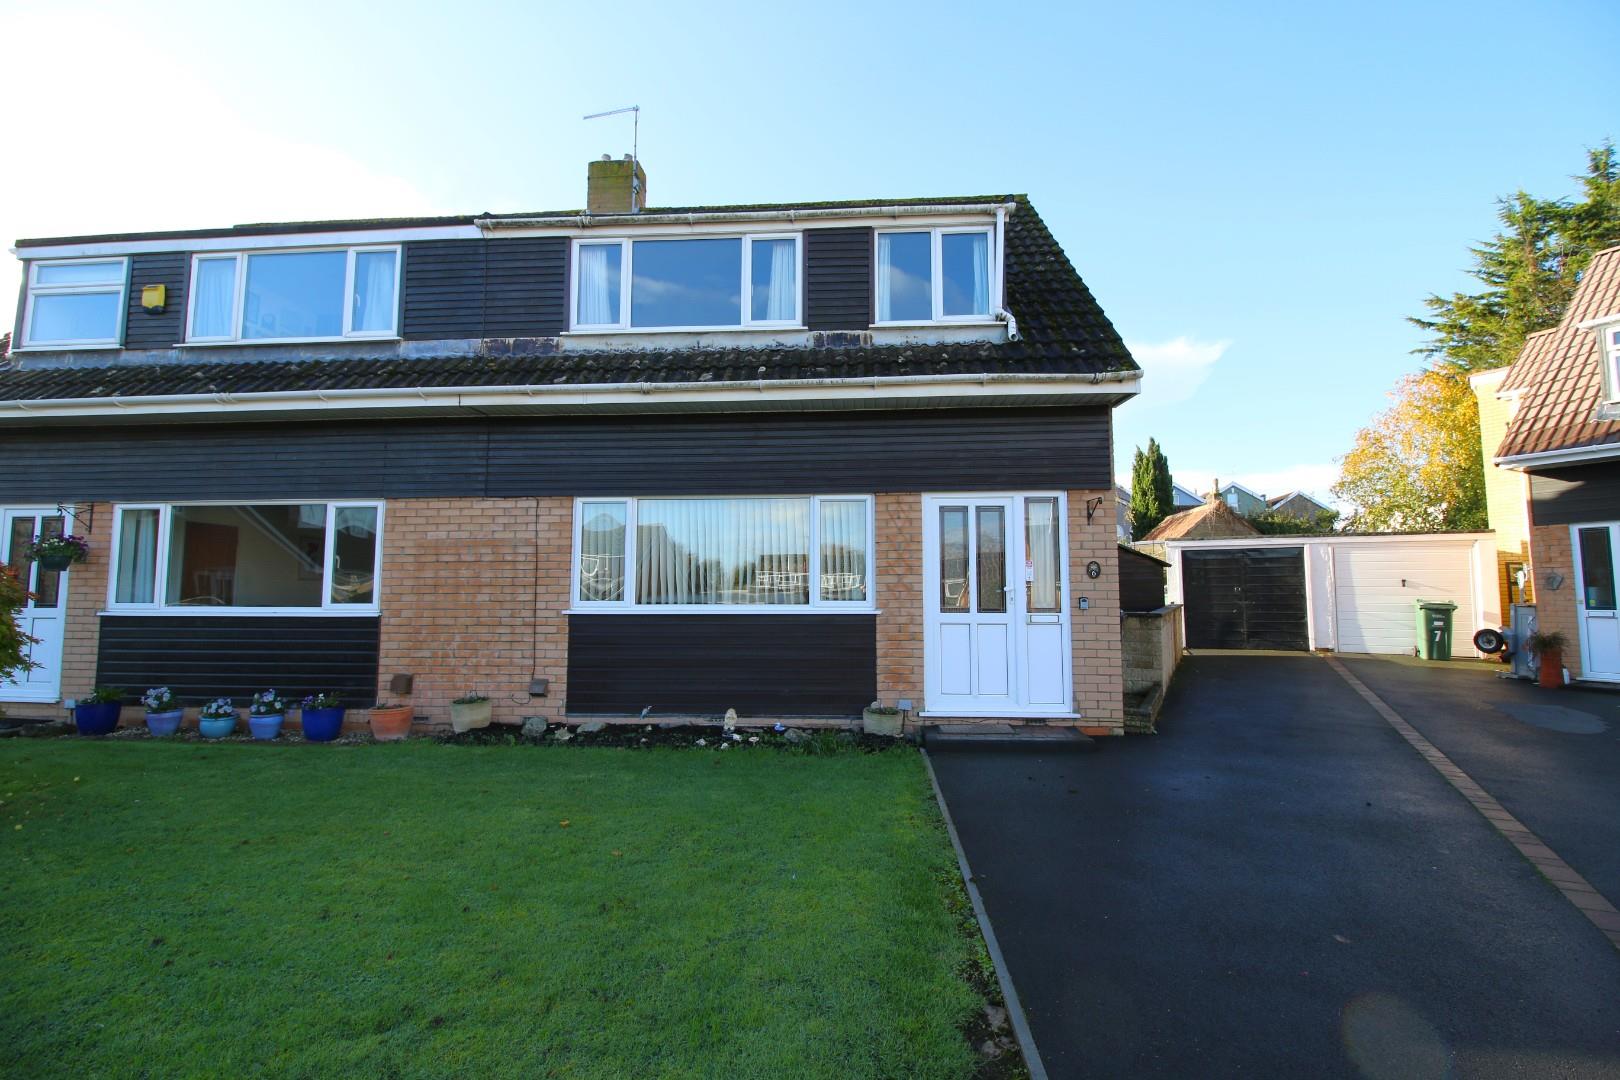 Three bedroom family home situated within a quiet cul-de-sac in central Yatton